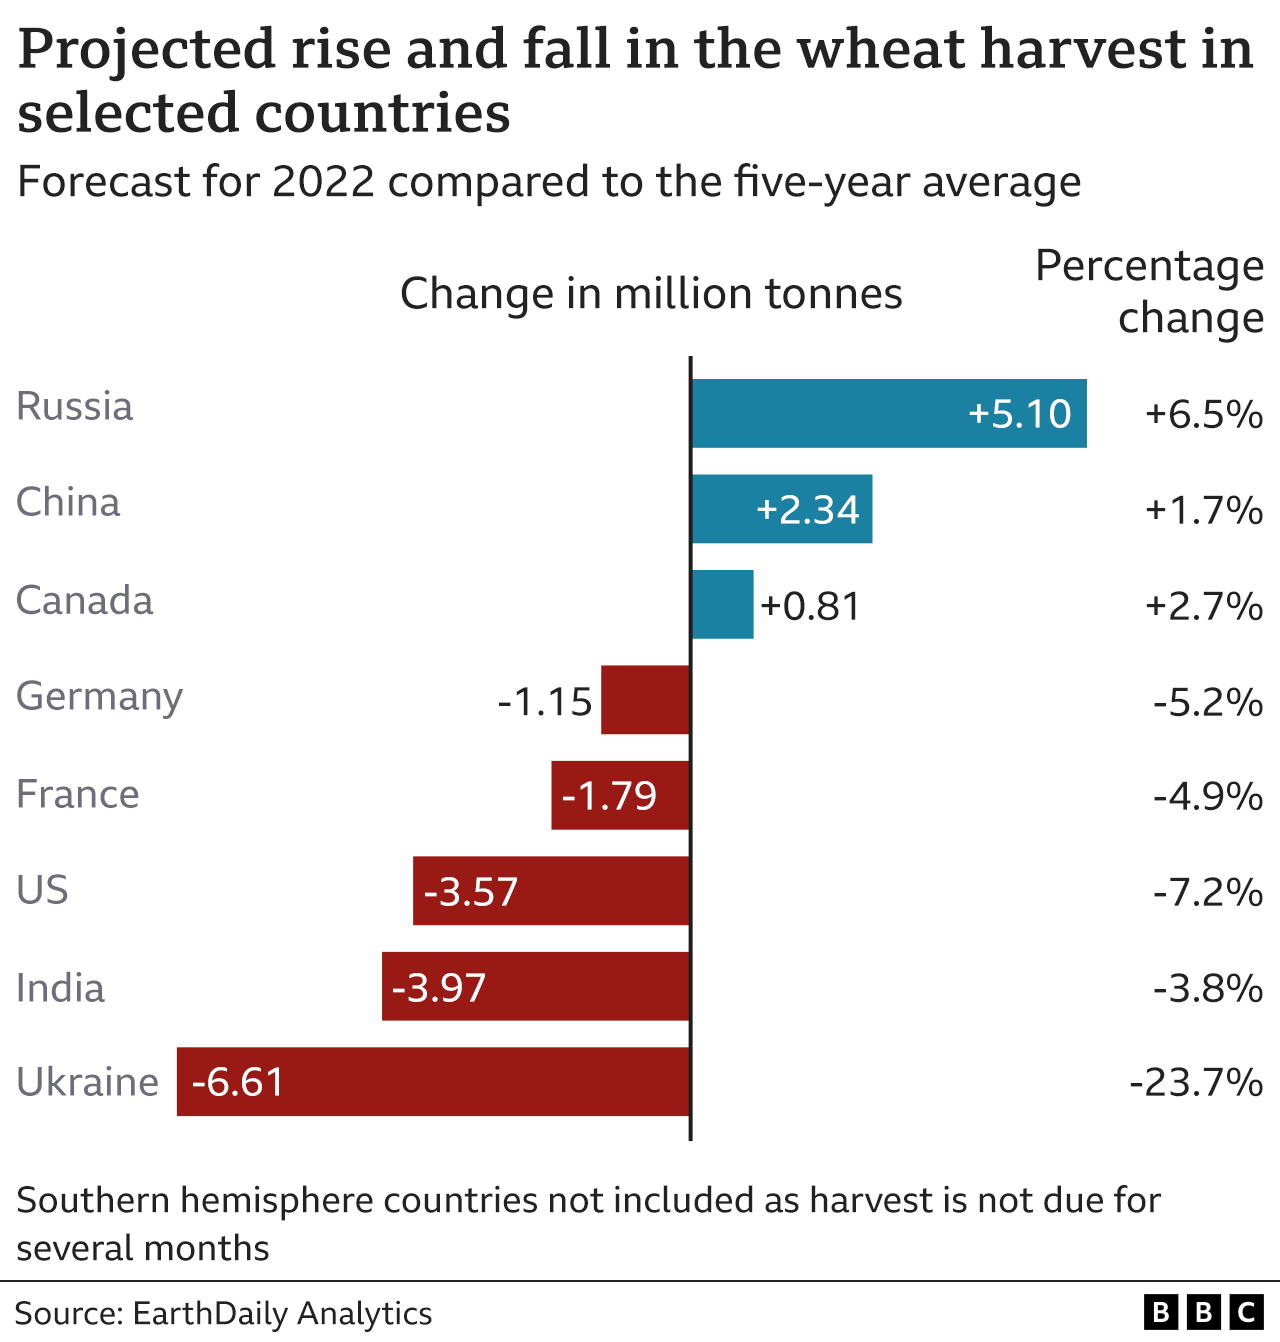 Chart showing projected rise and fall in wheat harvest in selected countries